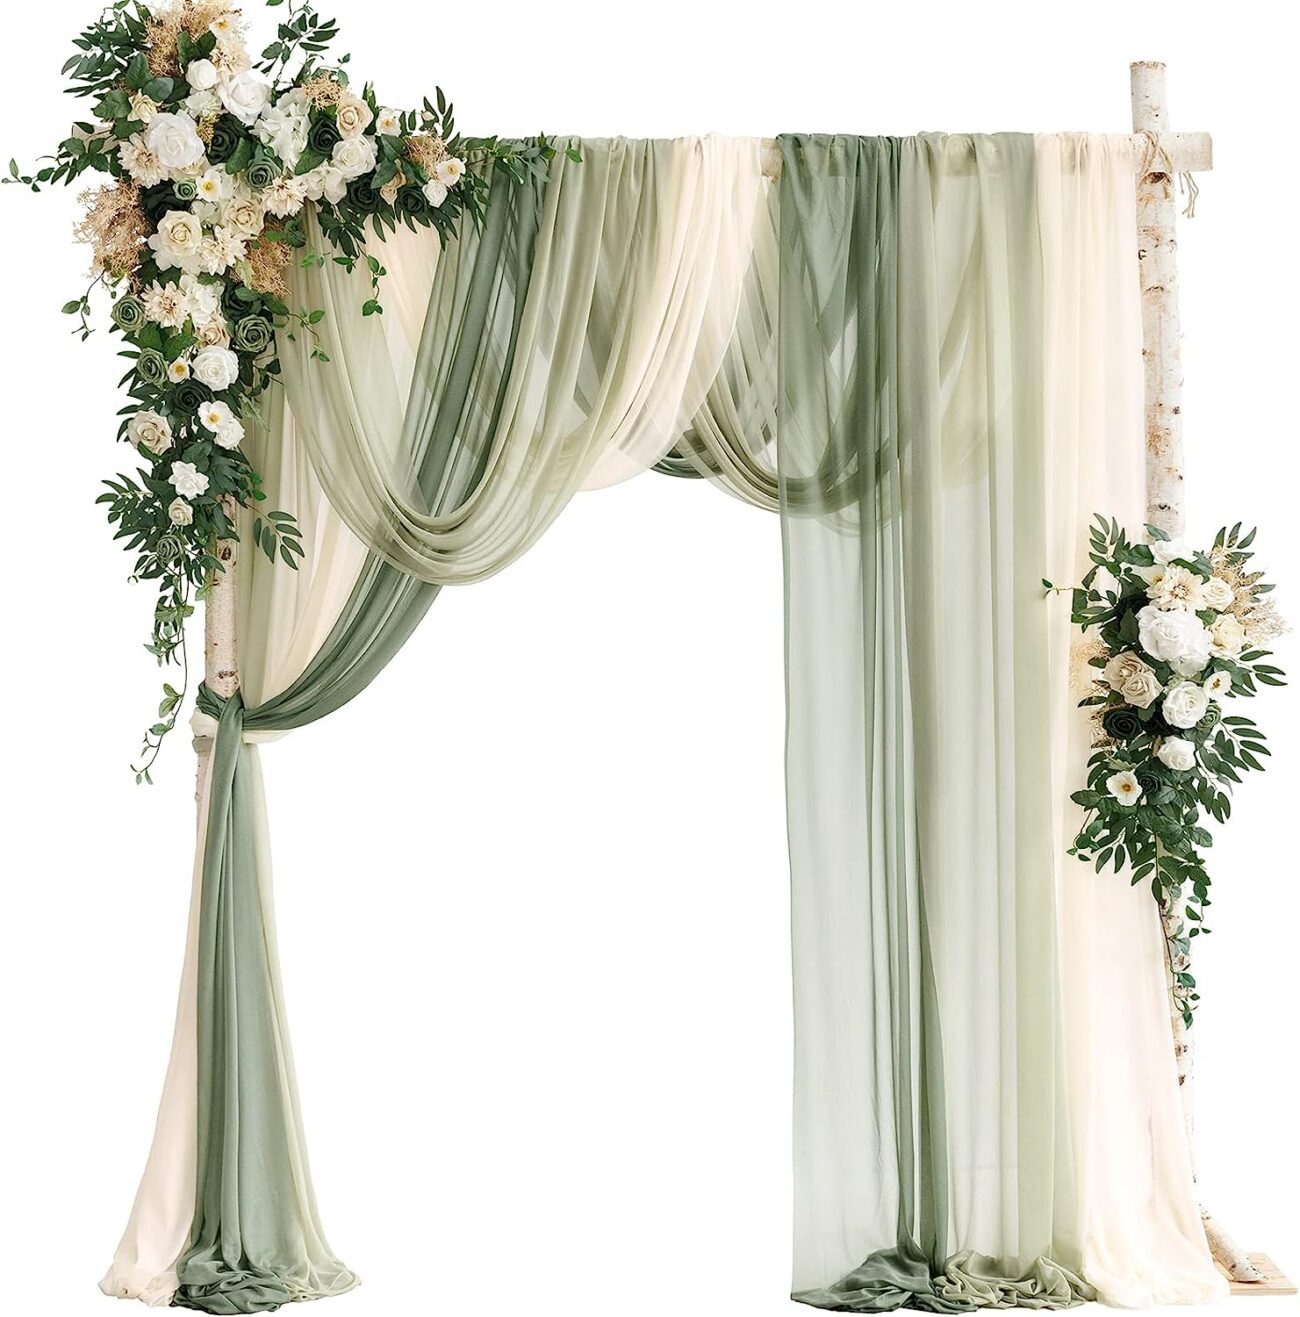 Emerald White Beige Arch Flowers with Drapes Kit (Pack of 5) - 2pcs Artificial Floral Swag with 3pcs 33ft Length Draping Fabric for Wedding Ceremony Backdrop Decor